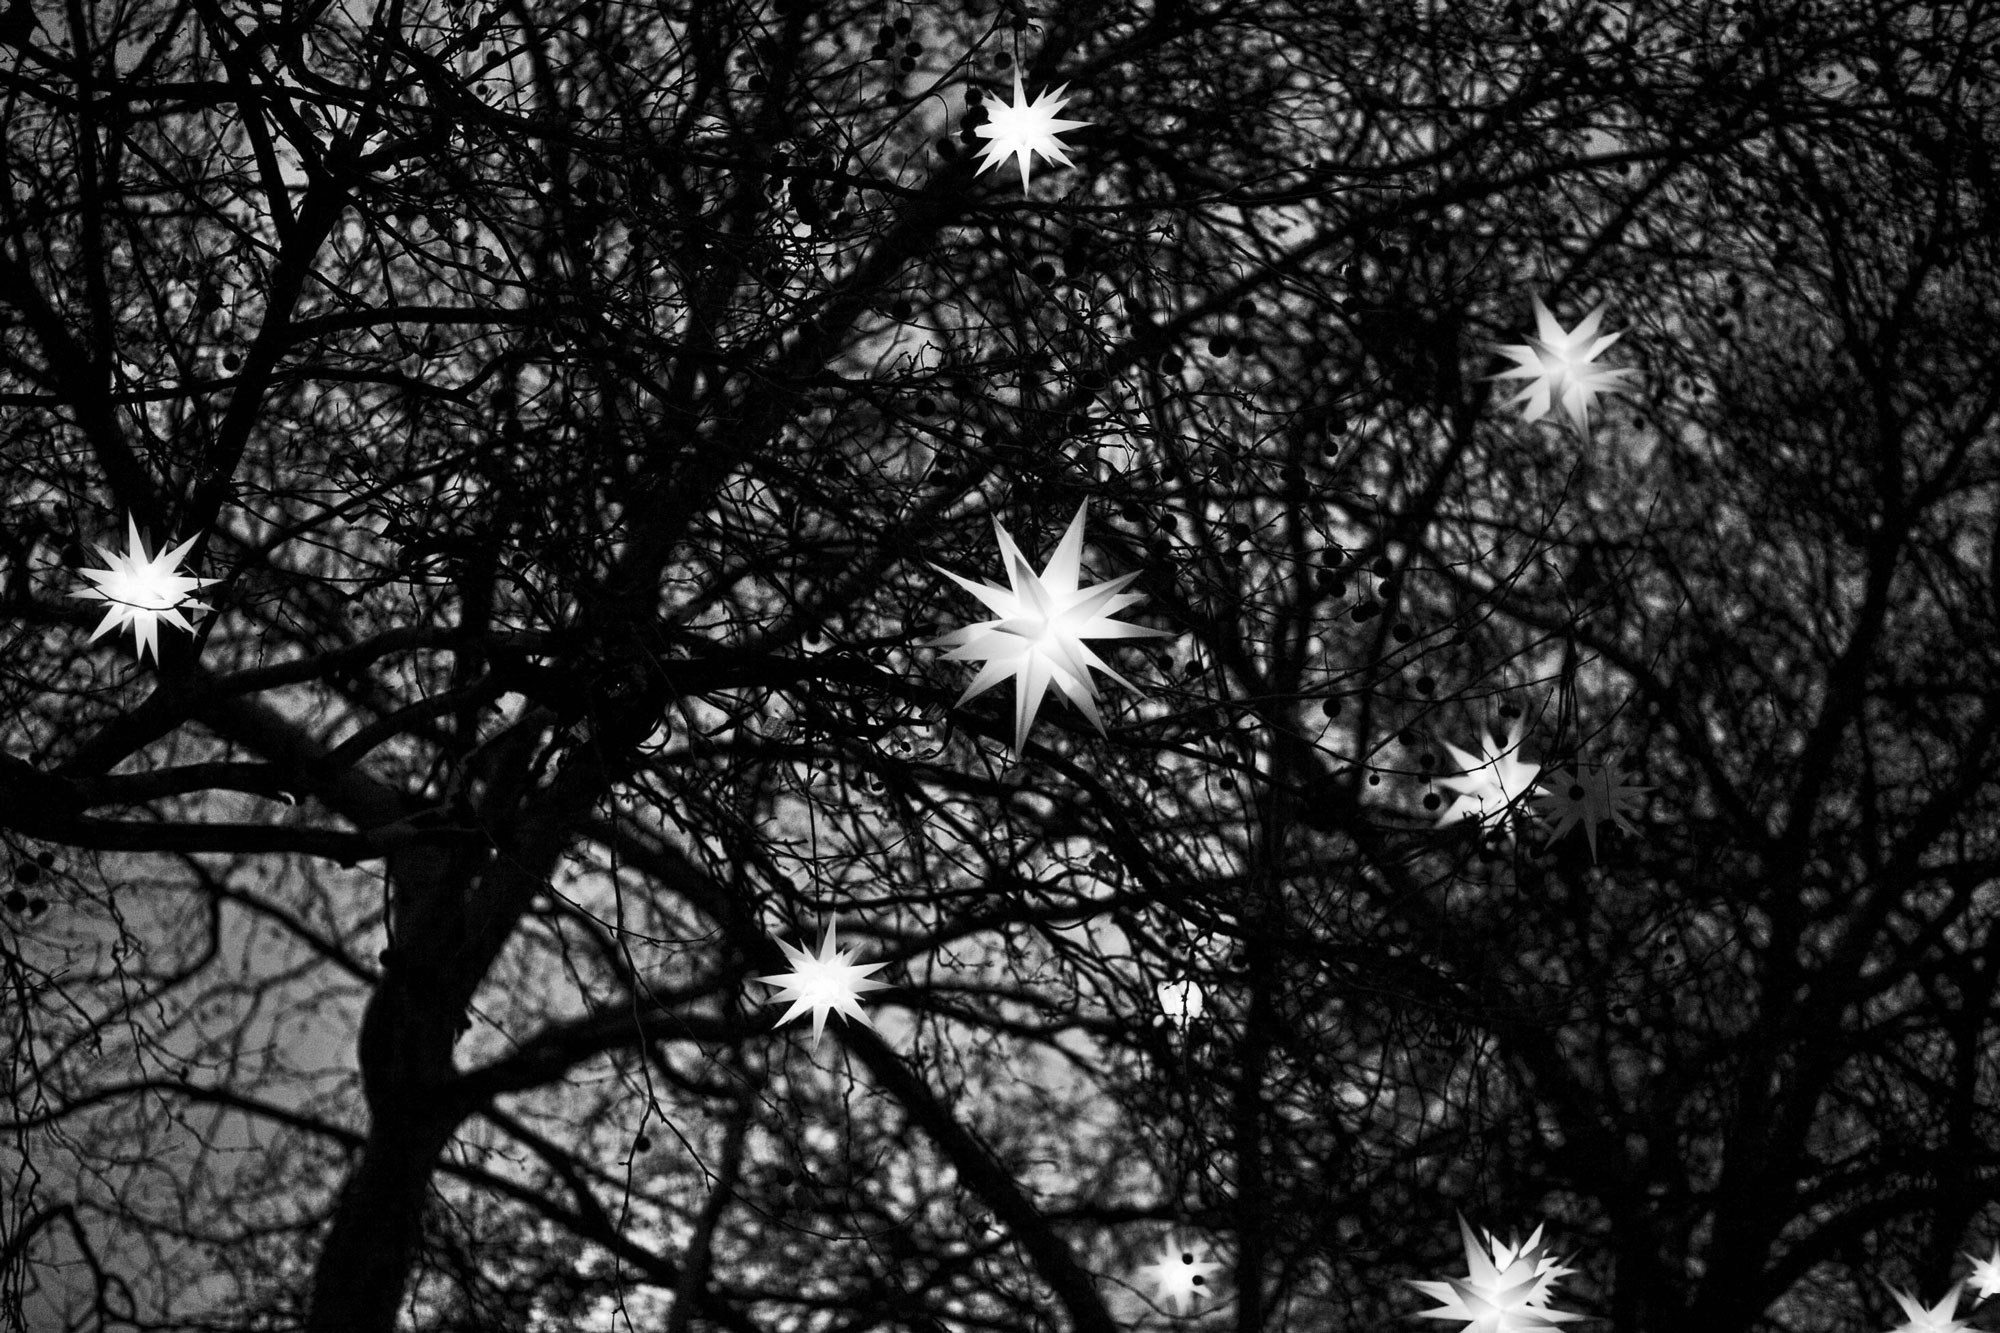 image of star shaped lights in trees